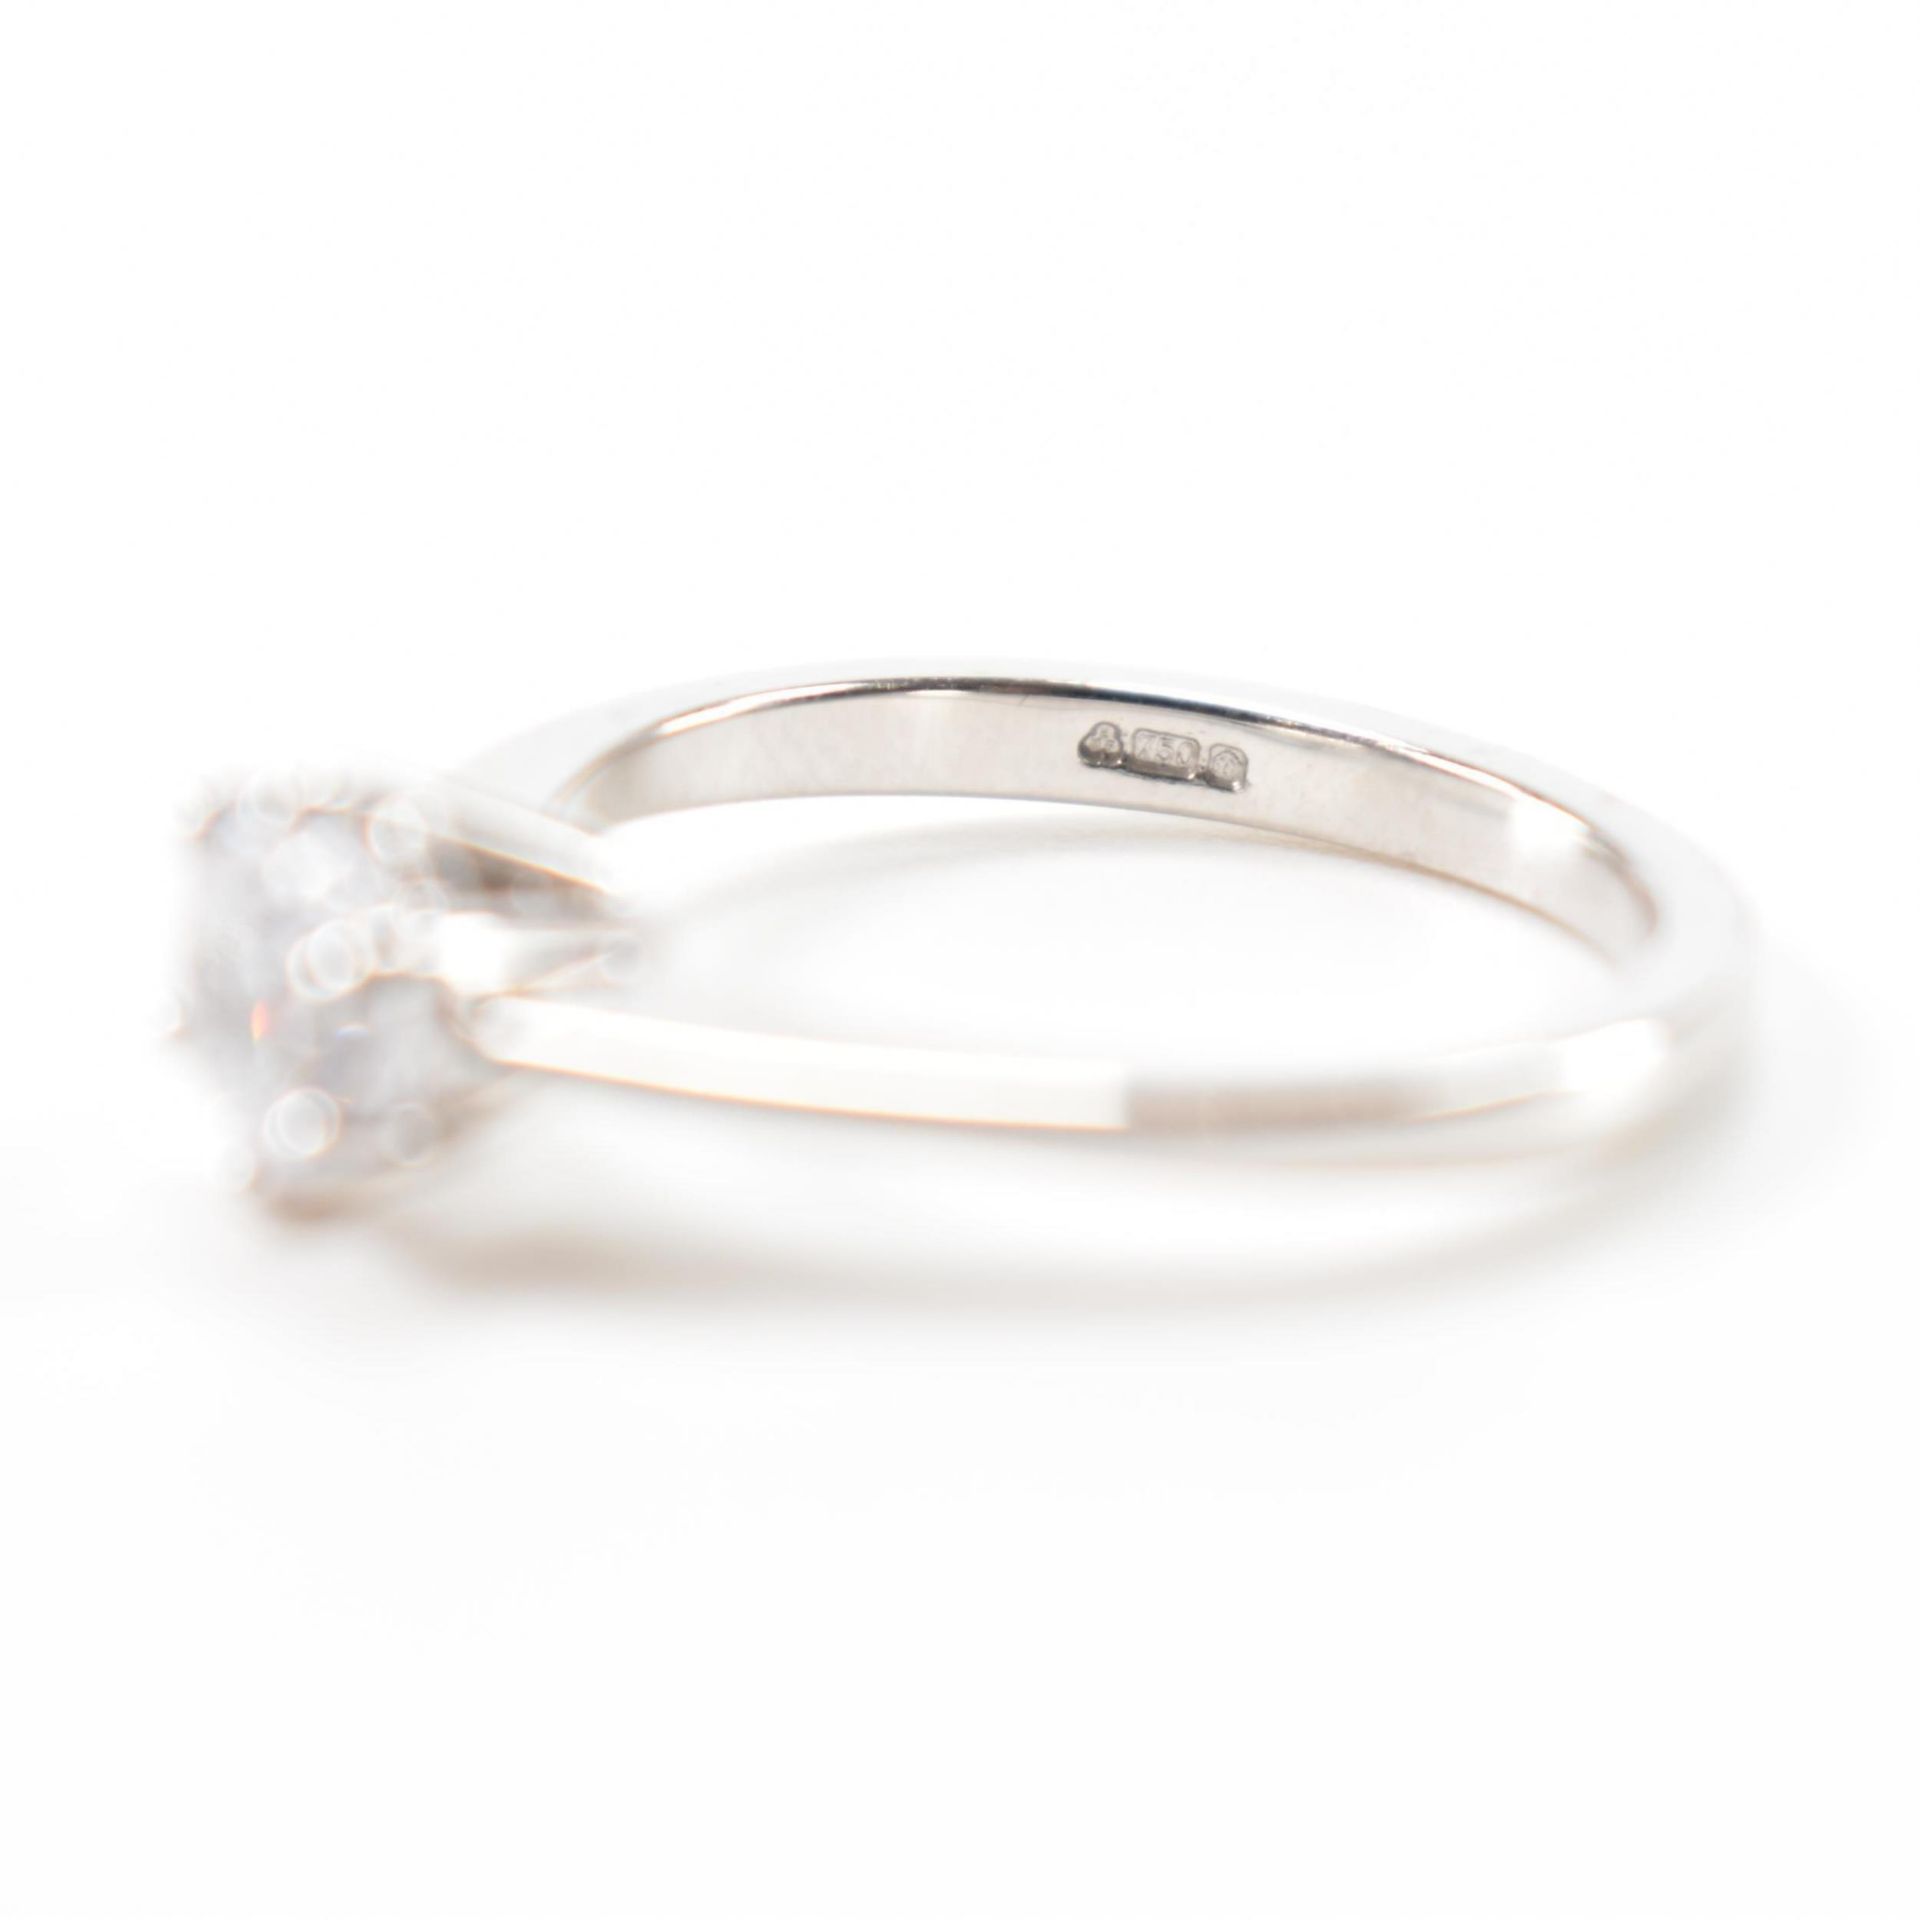 HALLMARKED 18CT GOLD & CZ SOLITAIRE RING - Image 5 of 6